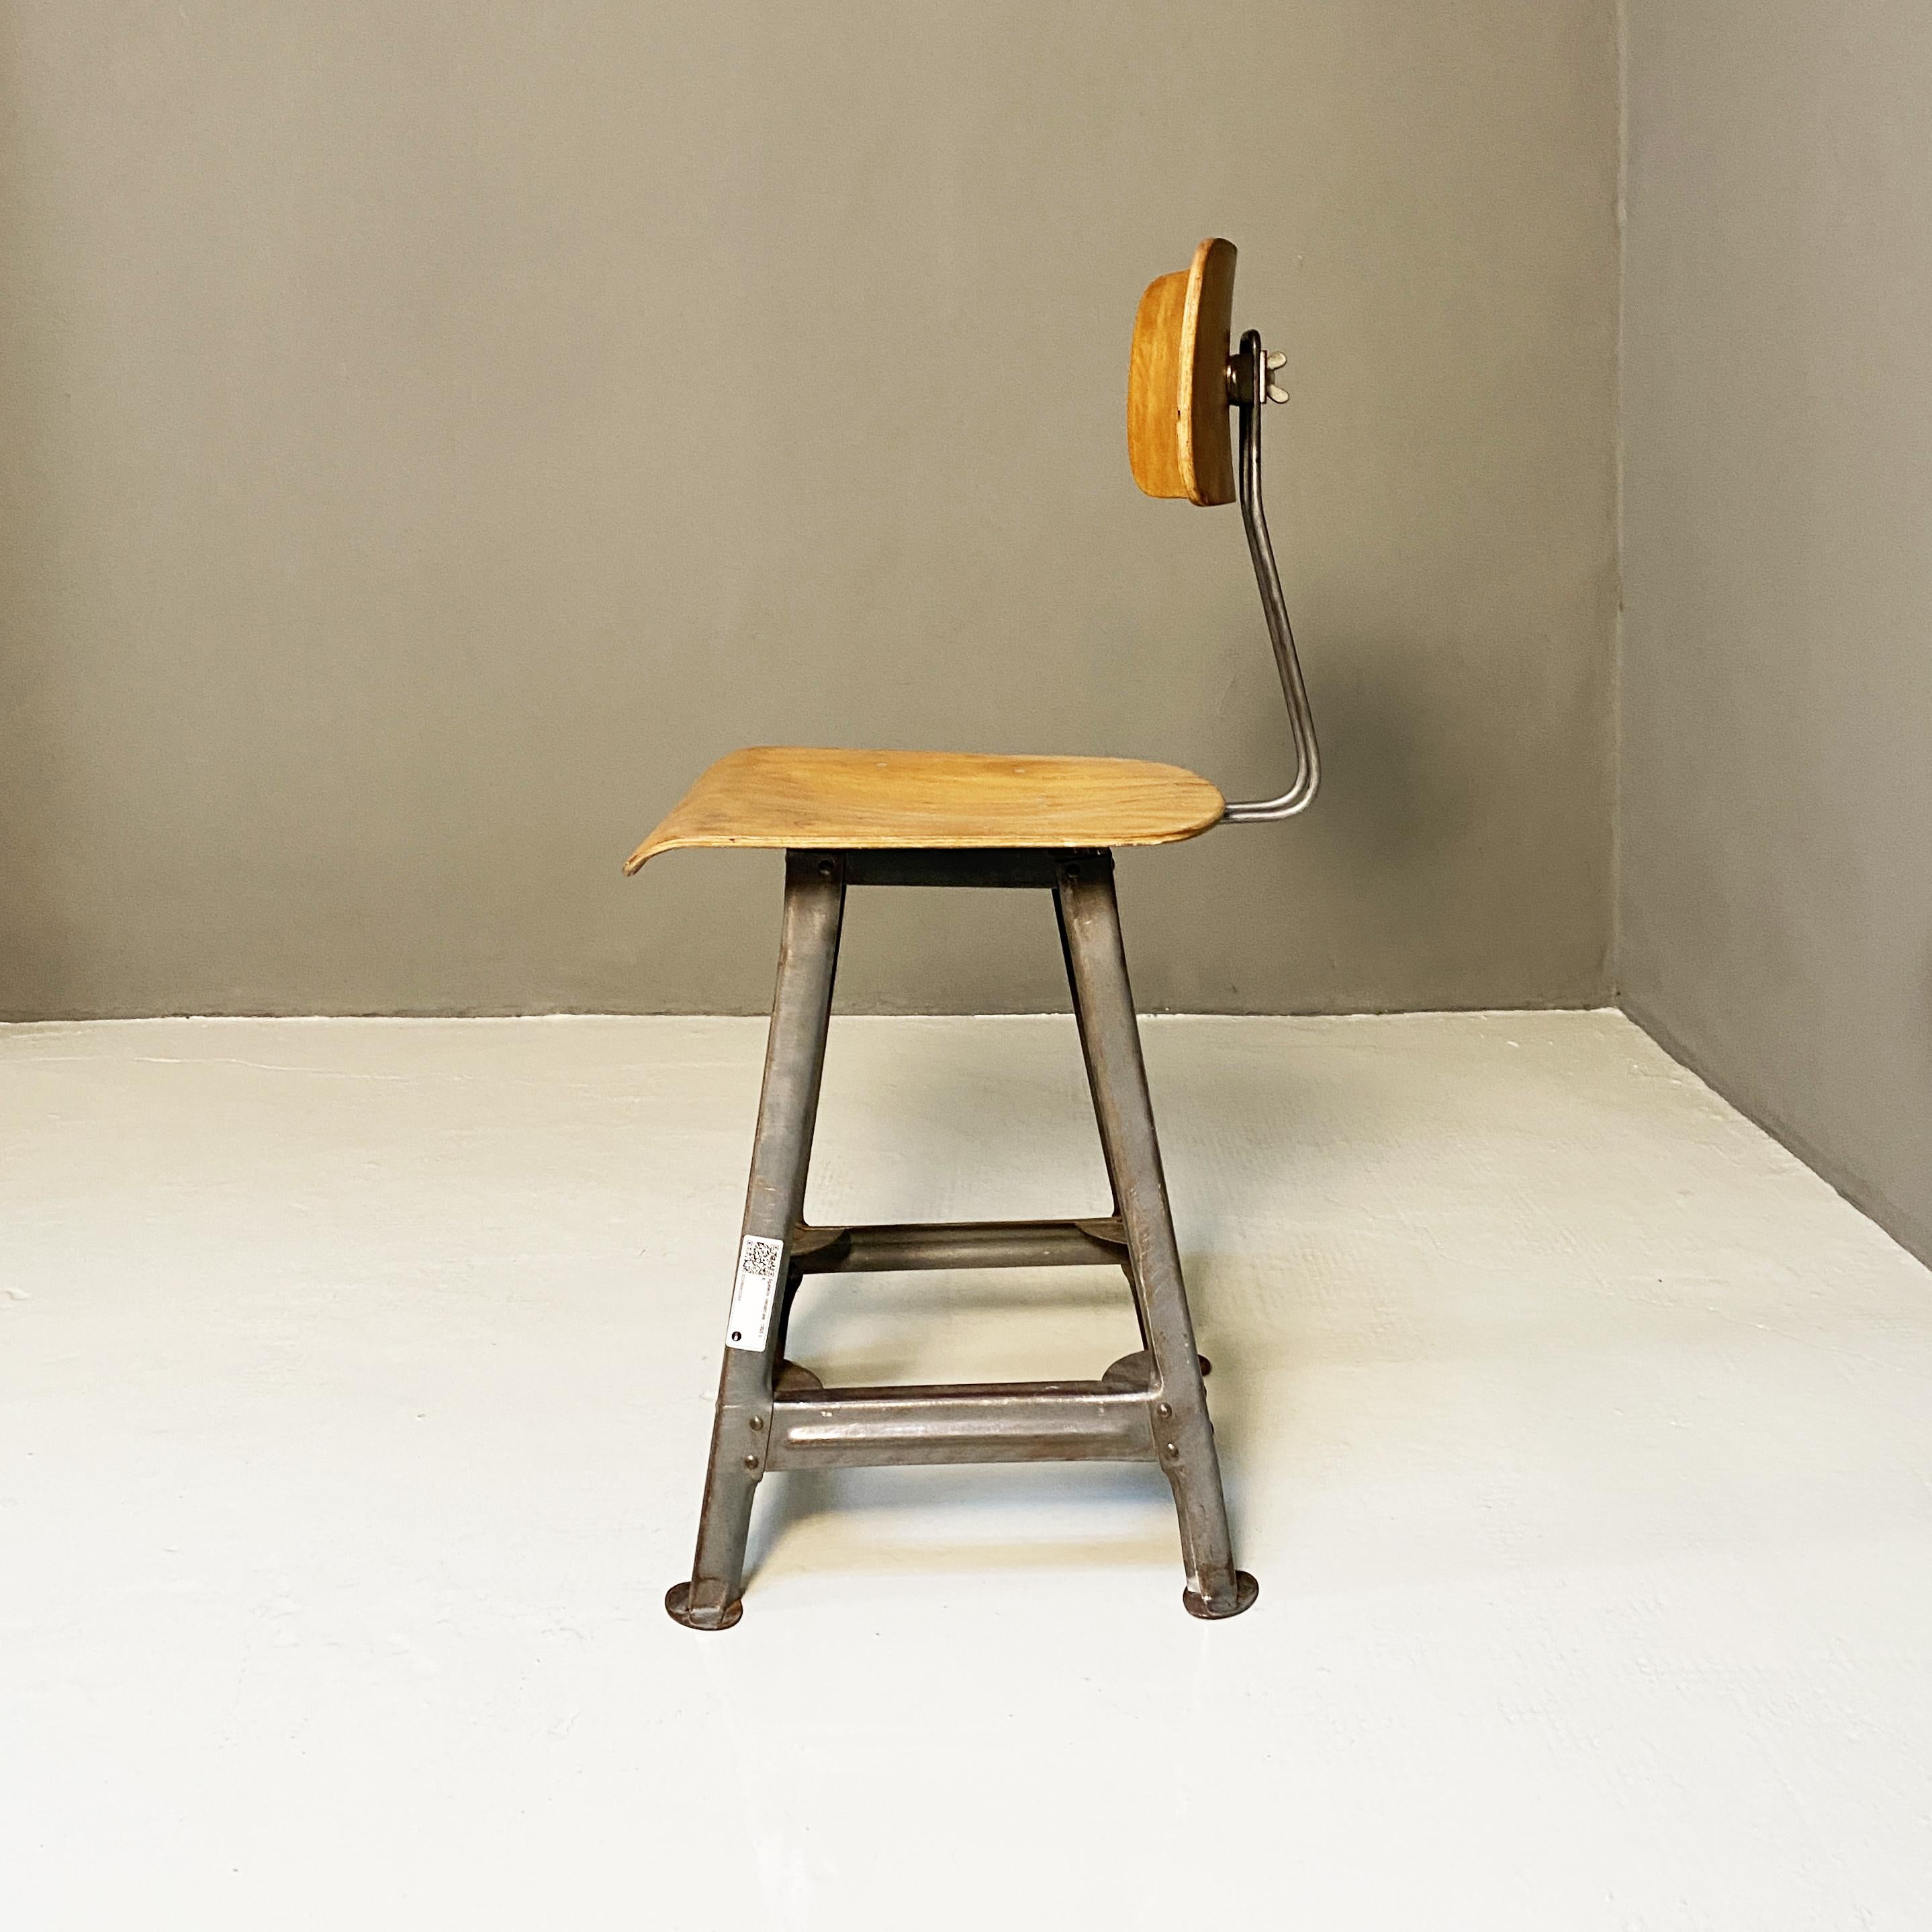 German Industrial Wood and Metal Chair, 1930s For Sale 3